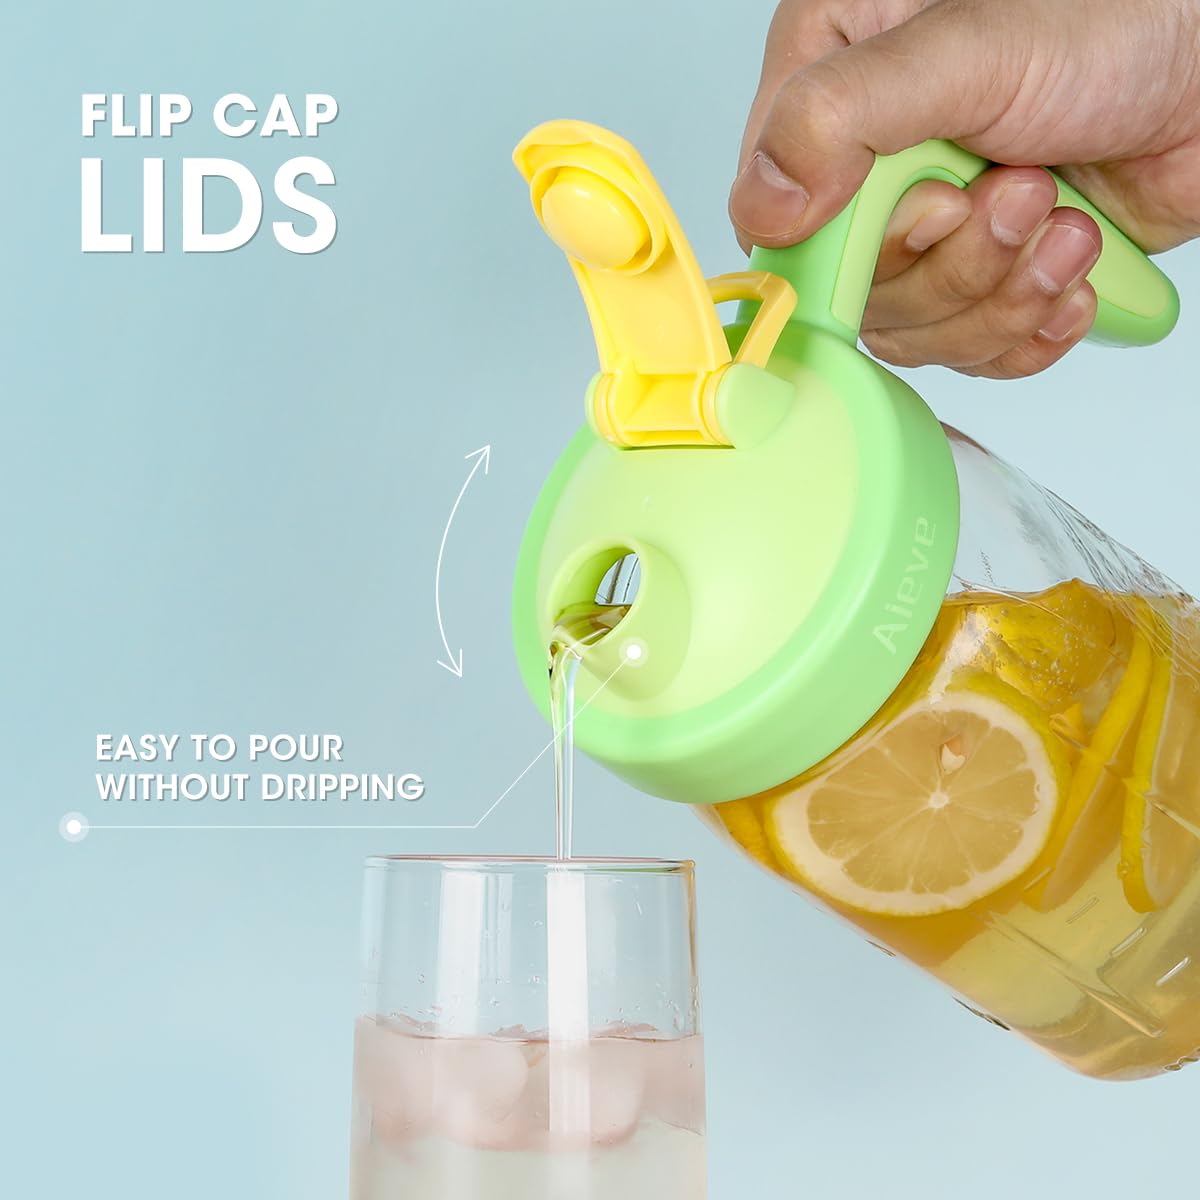 flip cap lids,easy to pour without dripping